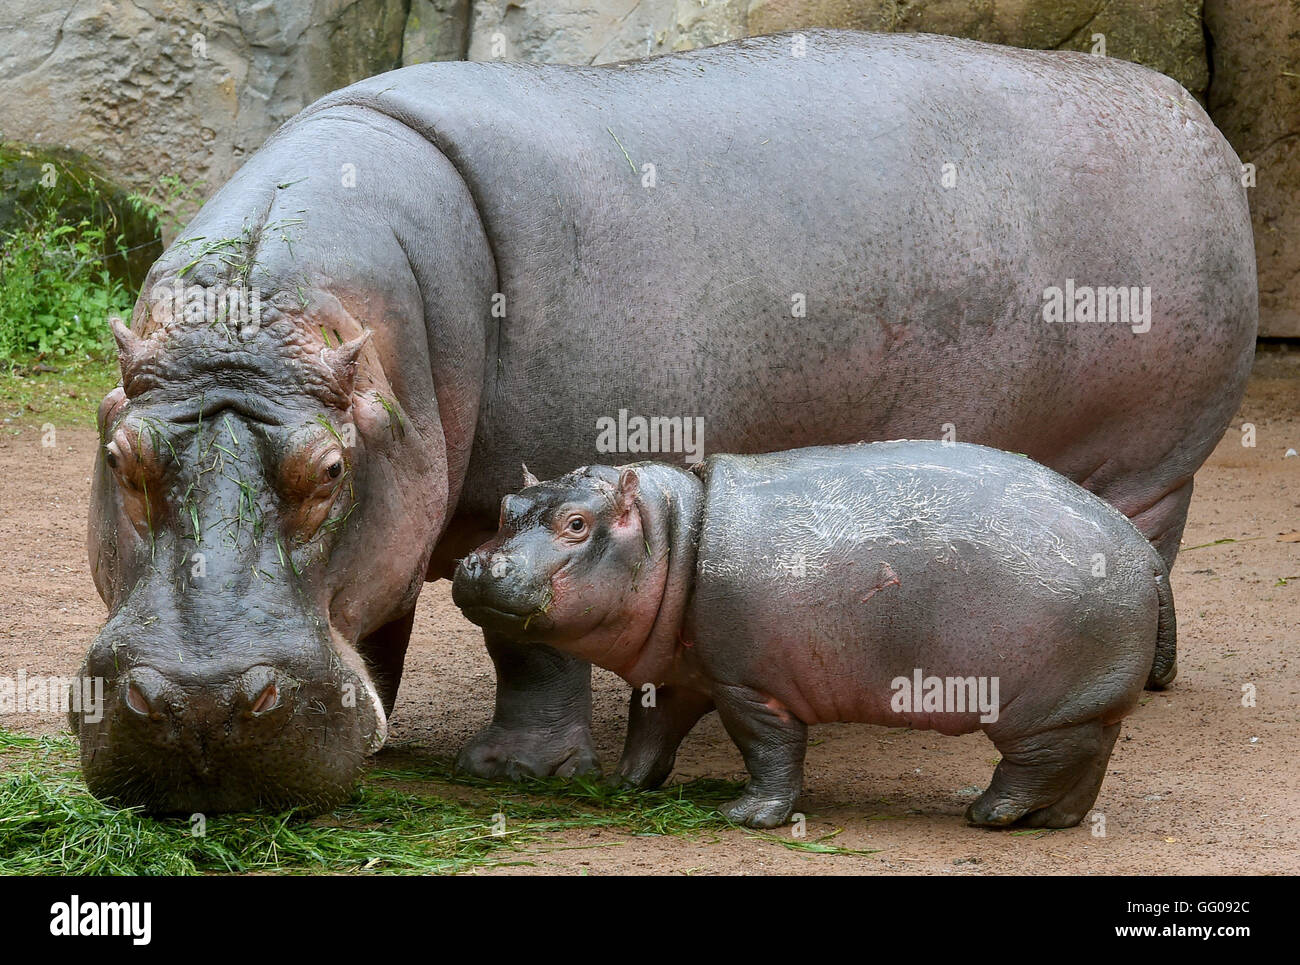 Hanover, Germany. 03rd Aug, 2016. Hippopotamus baby 'Pumeza, ' standing with its mother 'Cherry, ' is greeted with a large salad buffet in the shape of its name for its christening in the outdoor area at the Erlebnis Zoo in Hanover, Germany, 03 August 2016. The delicious surprise was really more of a present for 'Cherry.' The three-and-a-half-month-old 'Pumeza' still feeds mostly on mother's milk and only tries solid foods now and again. Photo: HOLGER HOLLEMANN/dpa/Alamy Live News Stock Photo